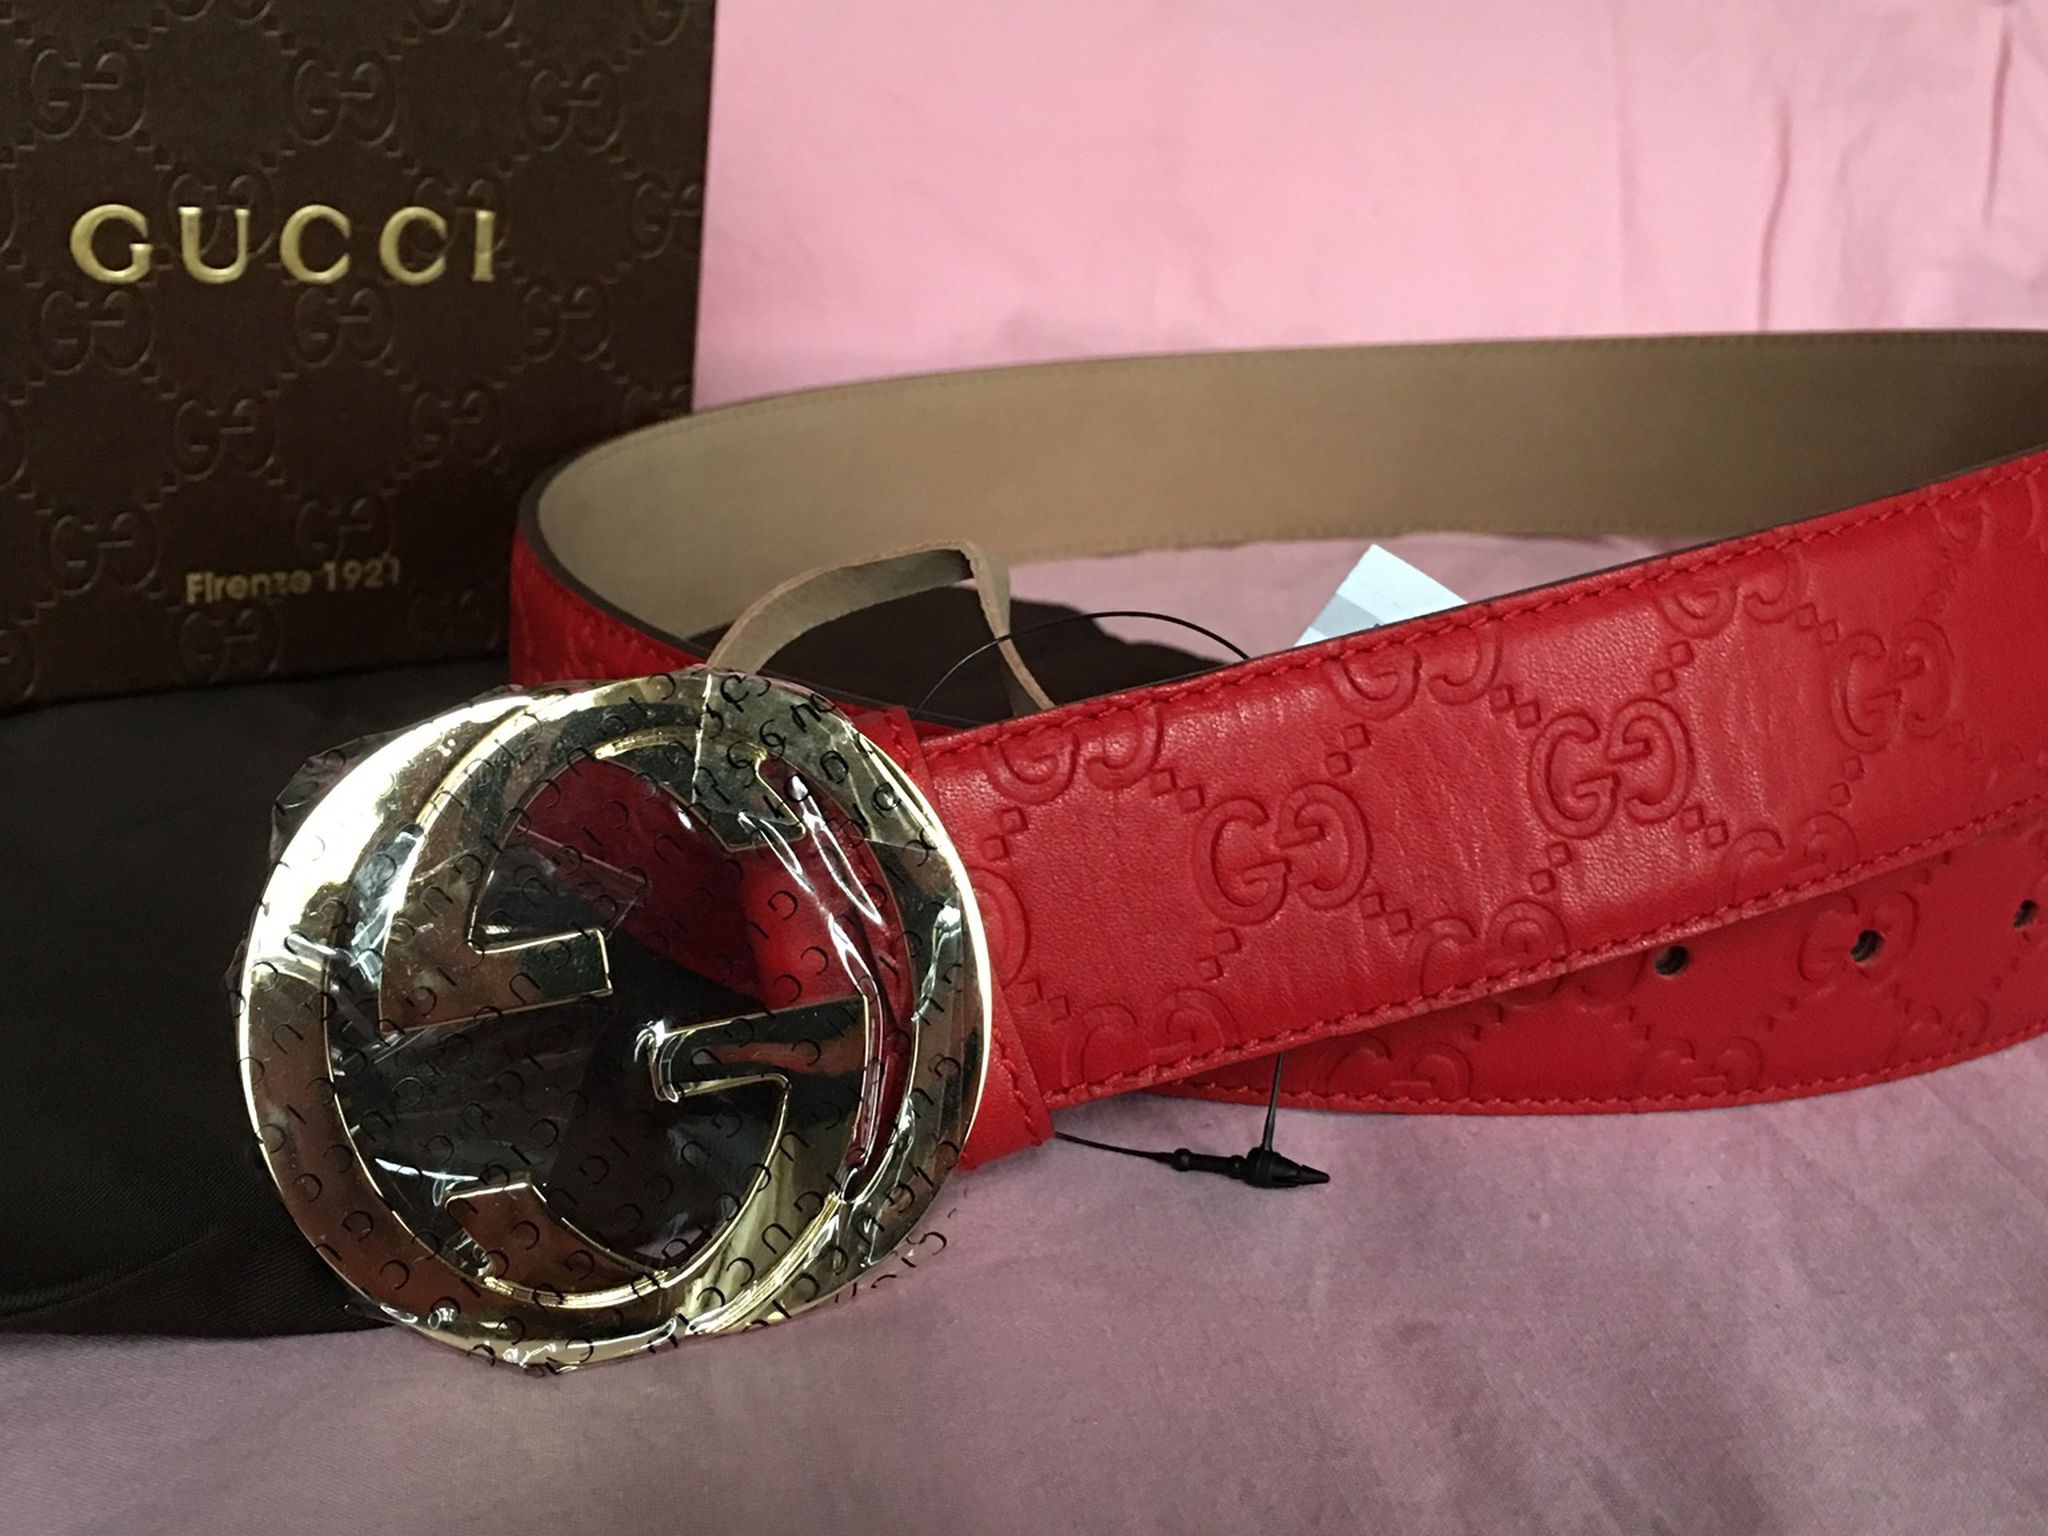 Gucci Ref Guccissima Belt 95:38 + More Sizes Available